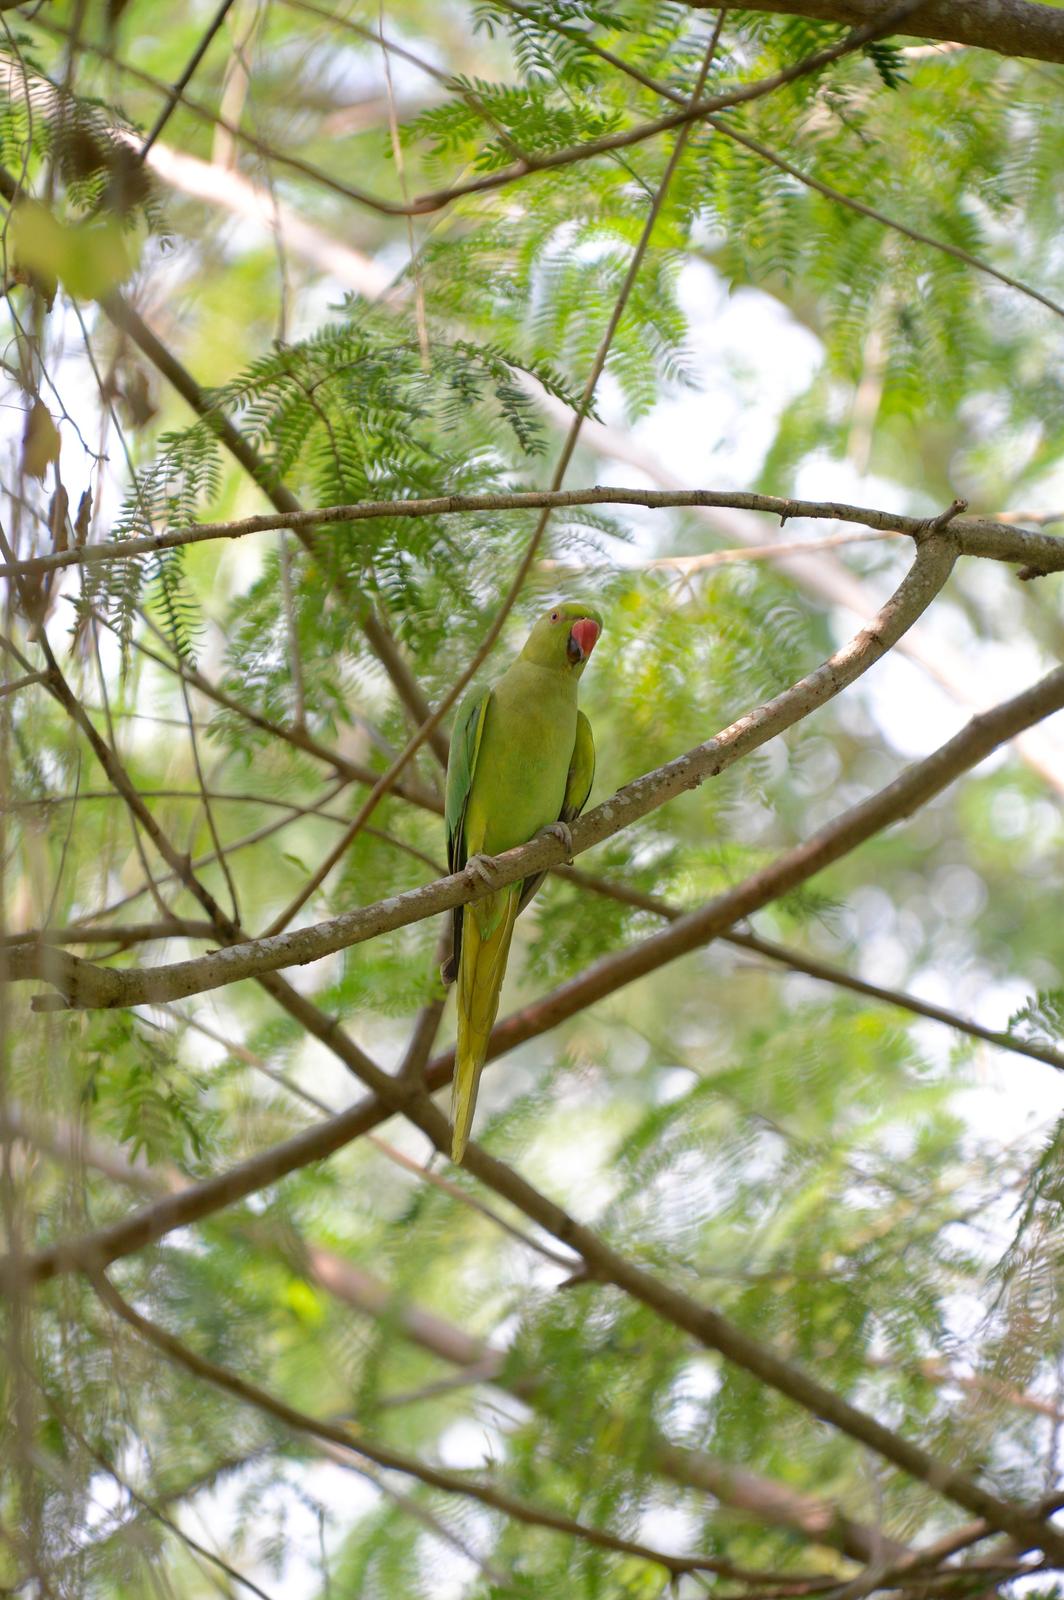 Rose-ringed Parakeet Photo by marcel finlay